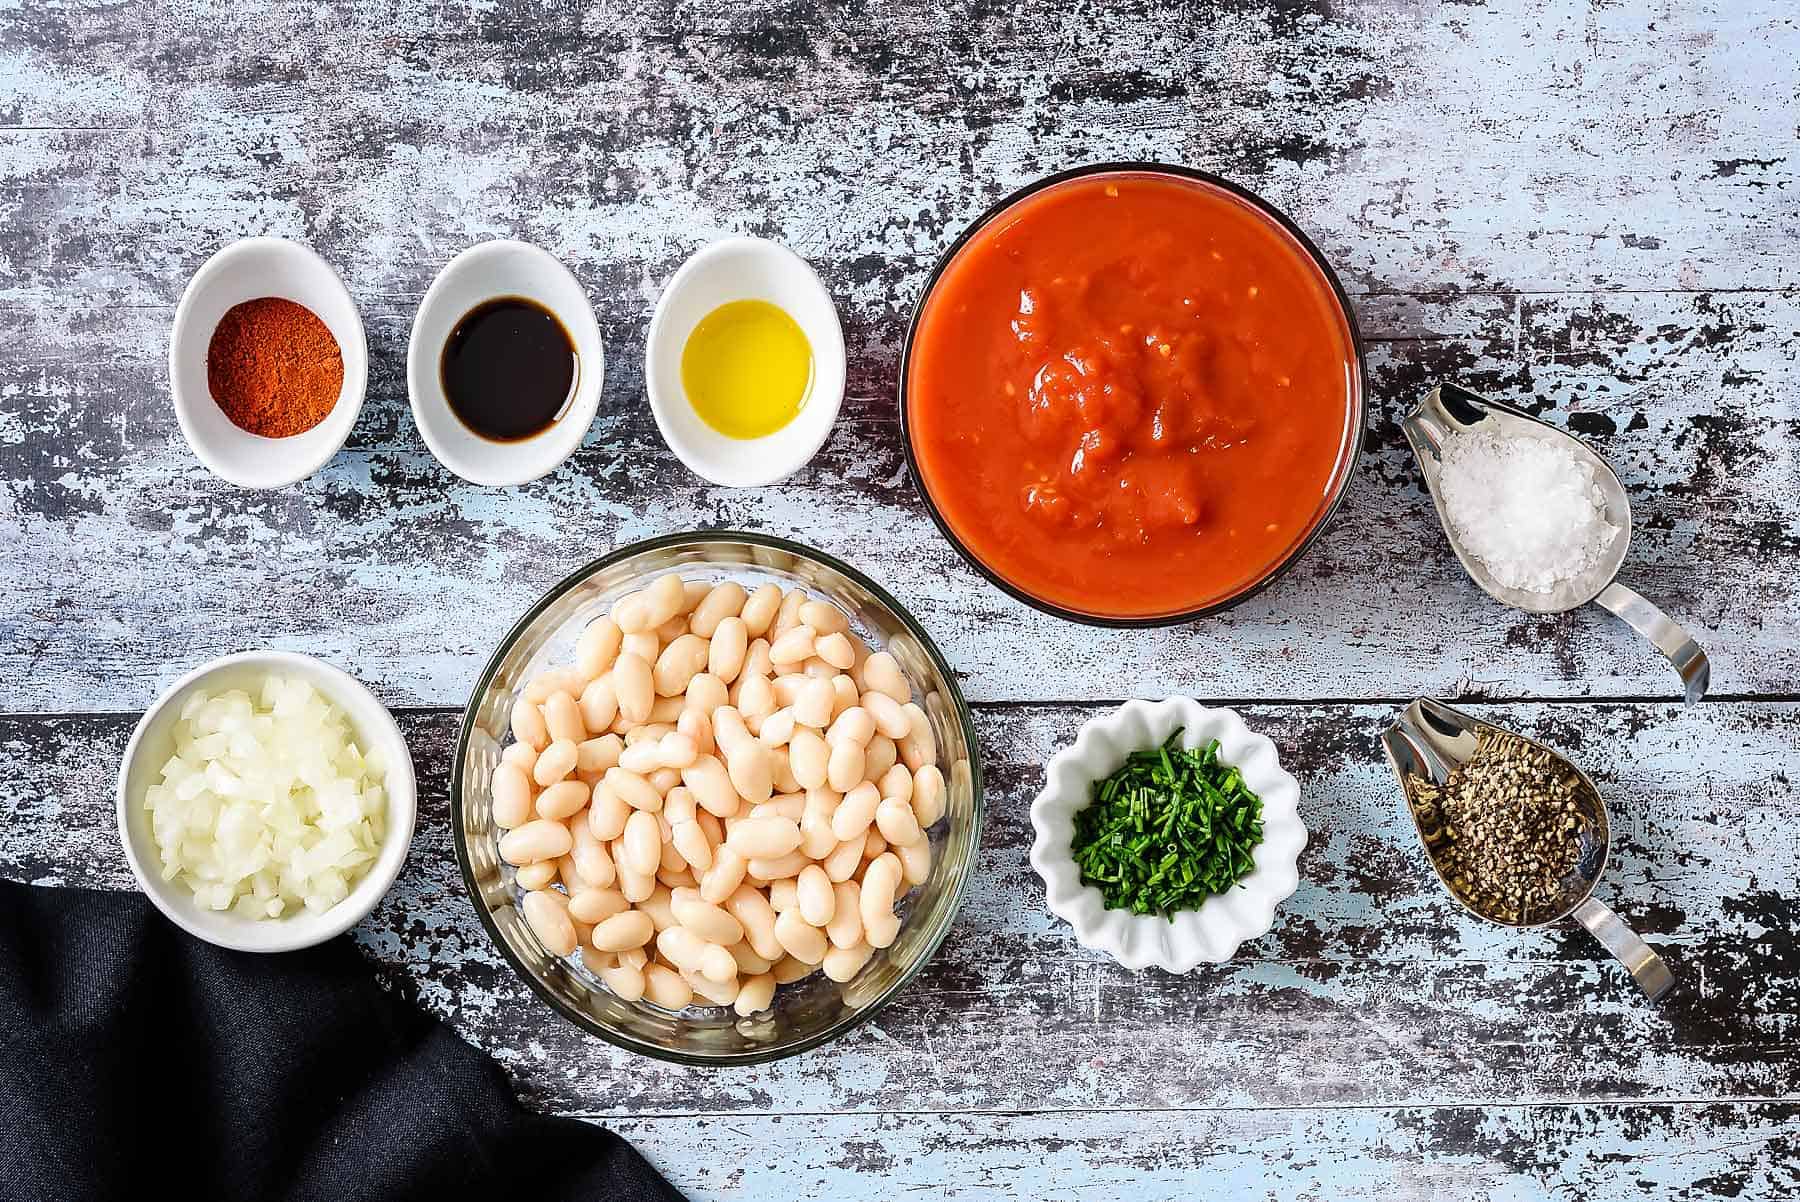 Ingredients for homemade beans on toast